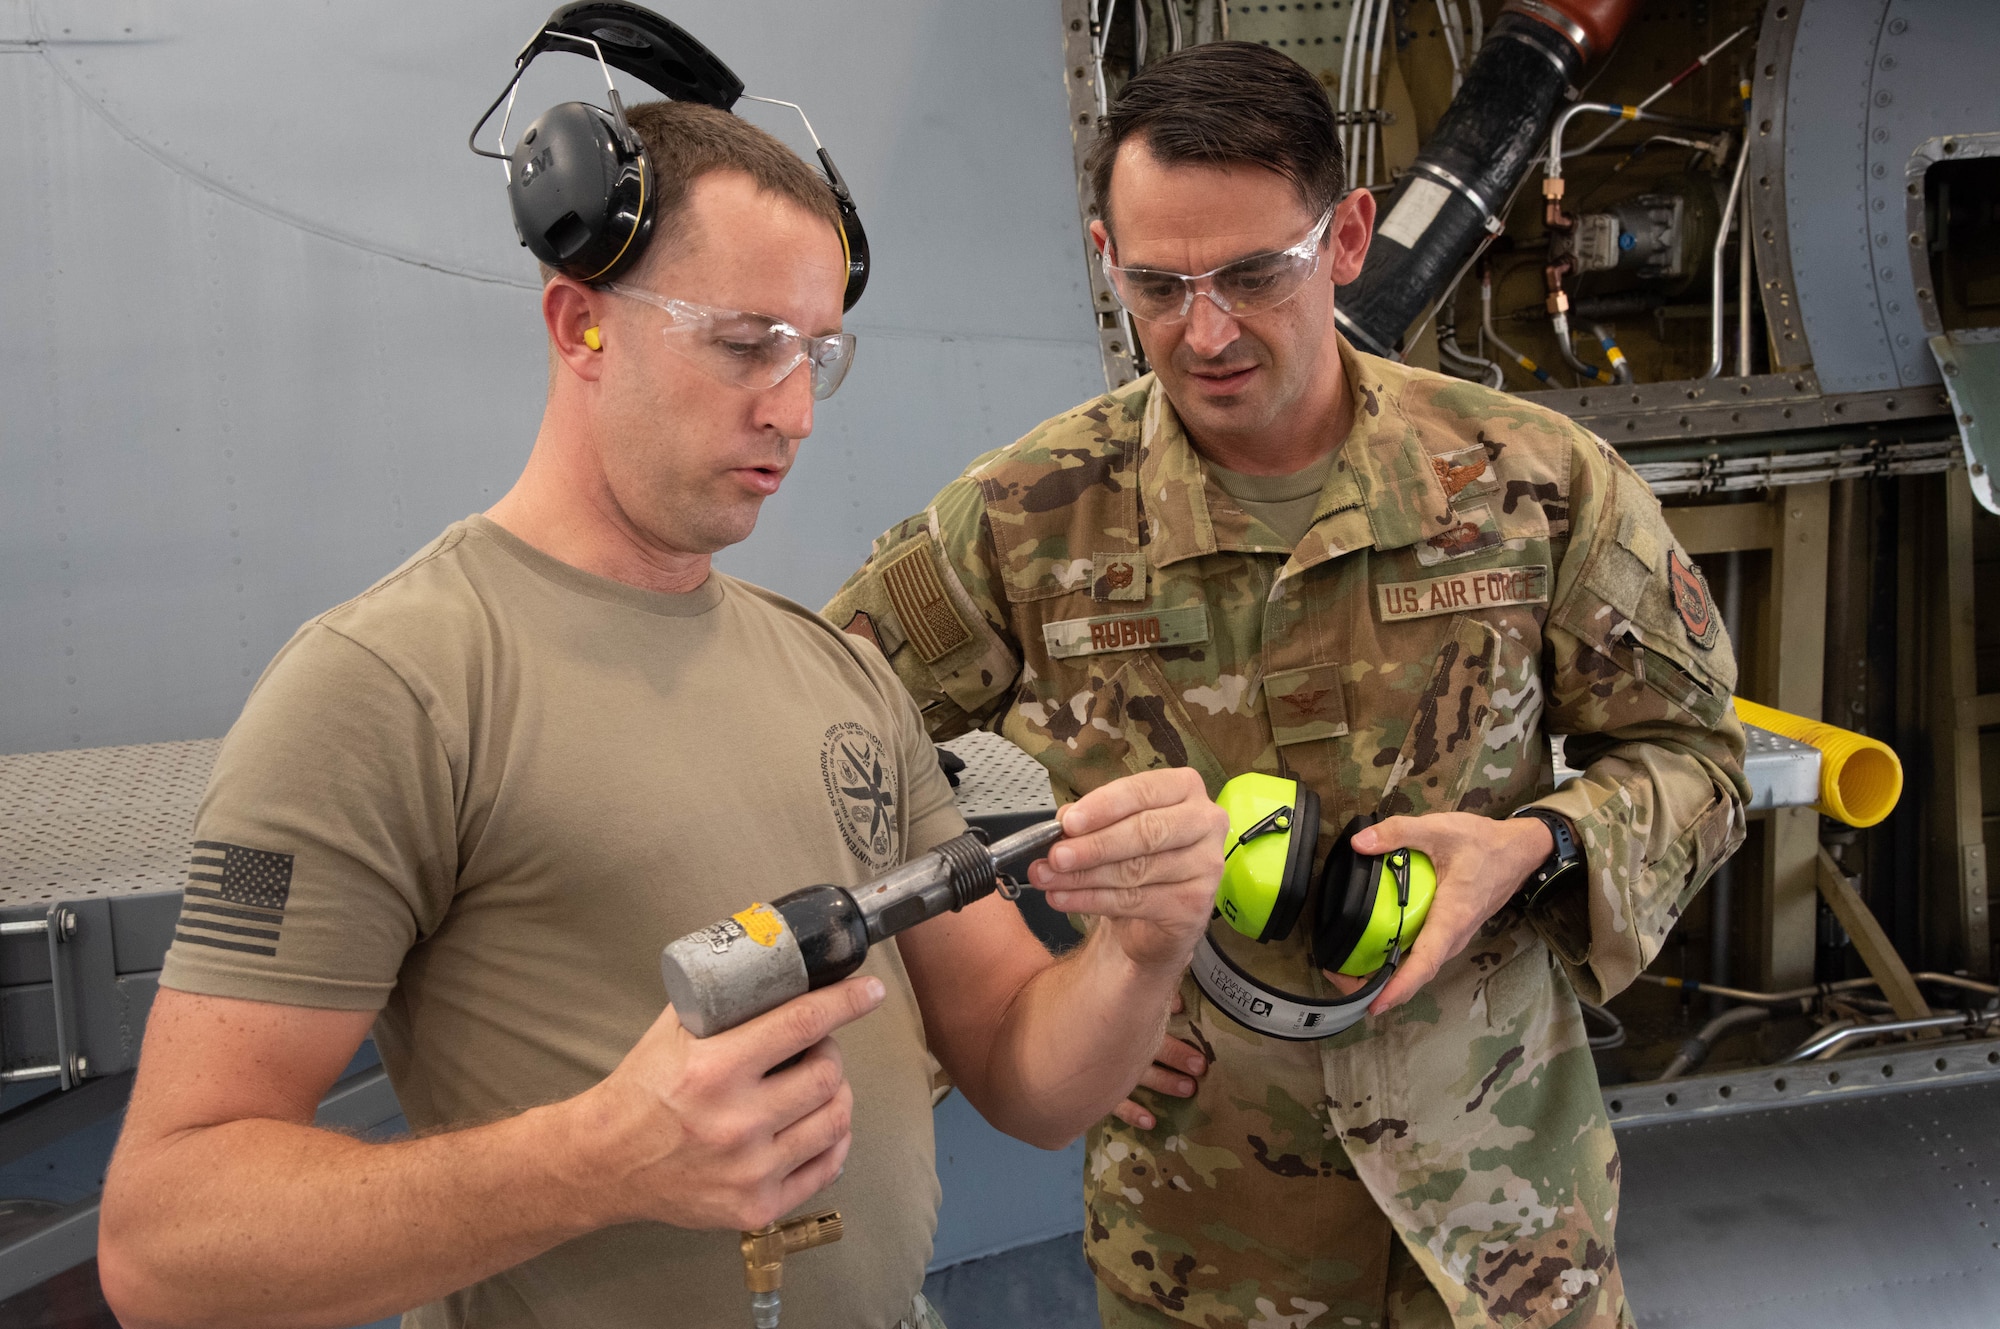 An Airman shows Col. Rubio how to work a power tool.